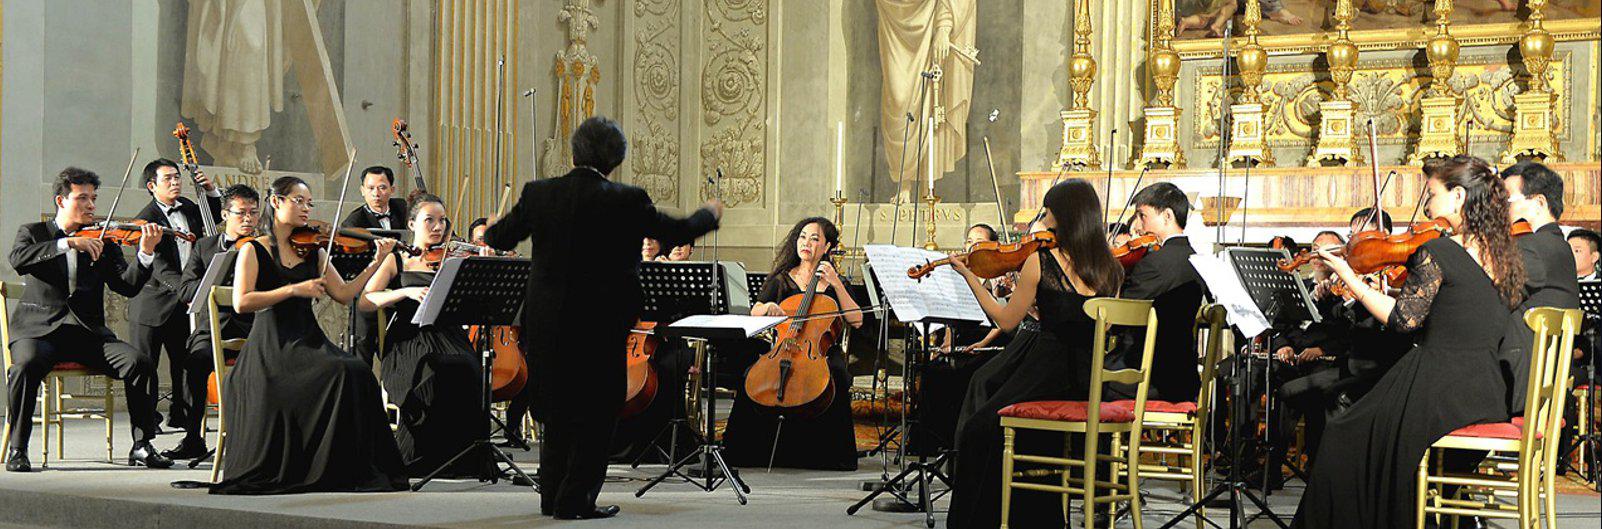 Concerts in the Pauline Chapel